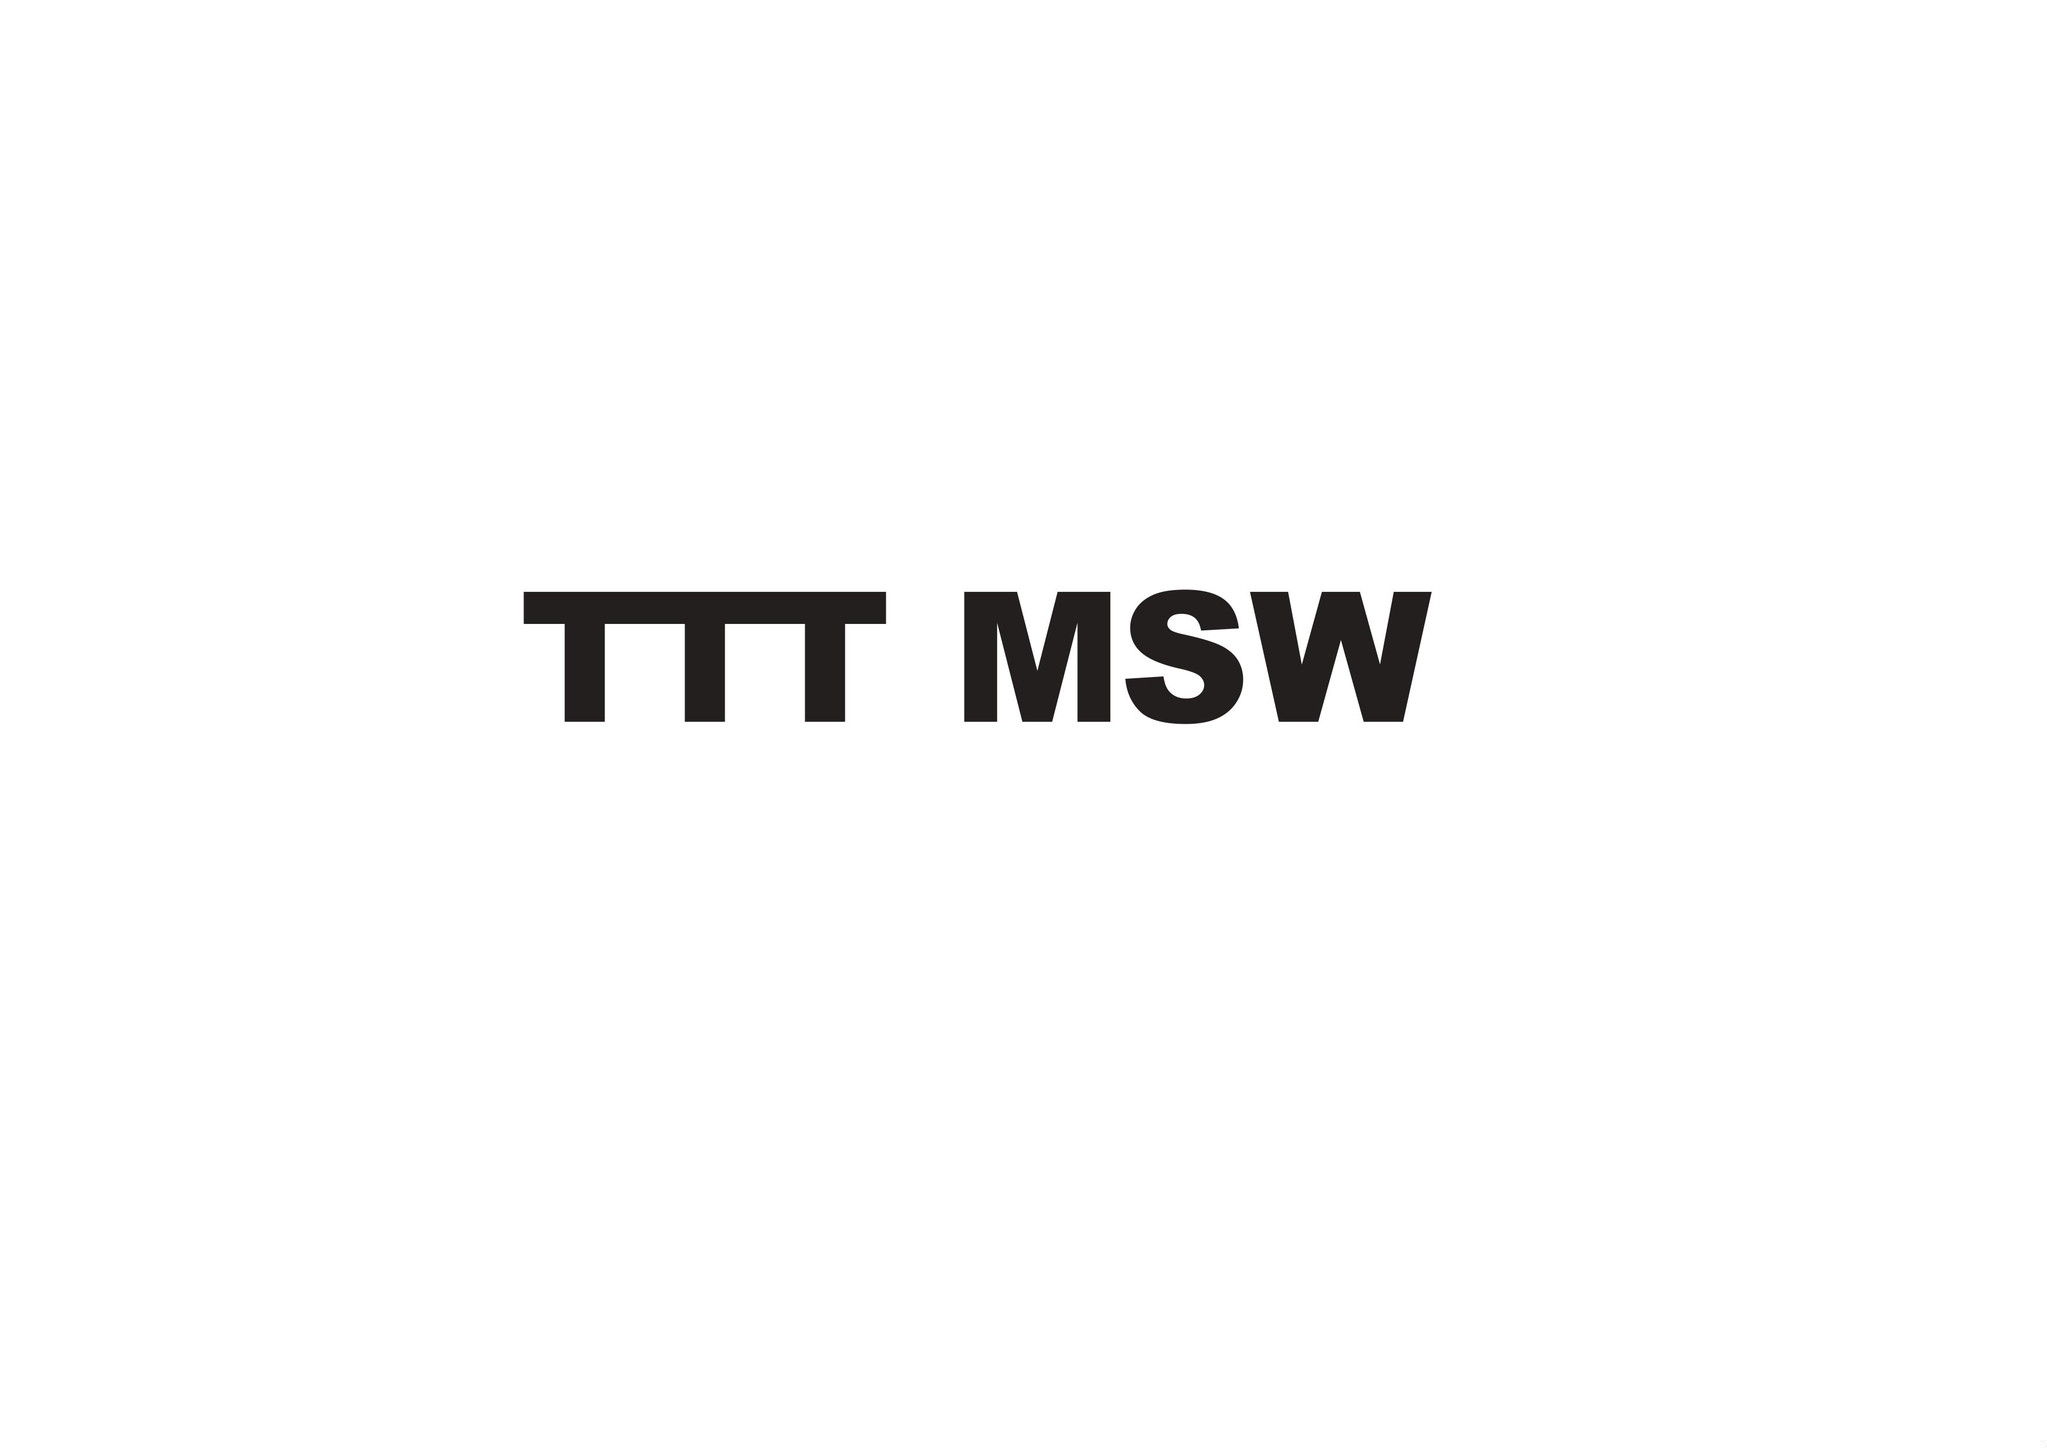 ABOUT | TTTMSW